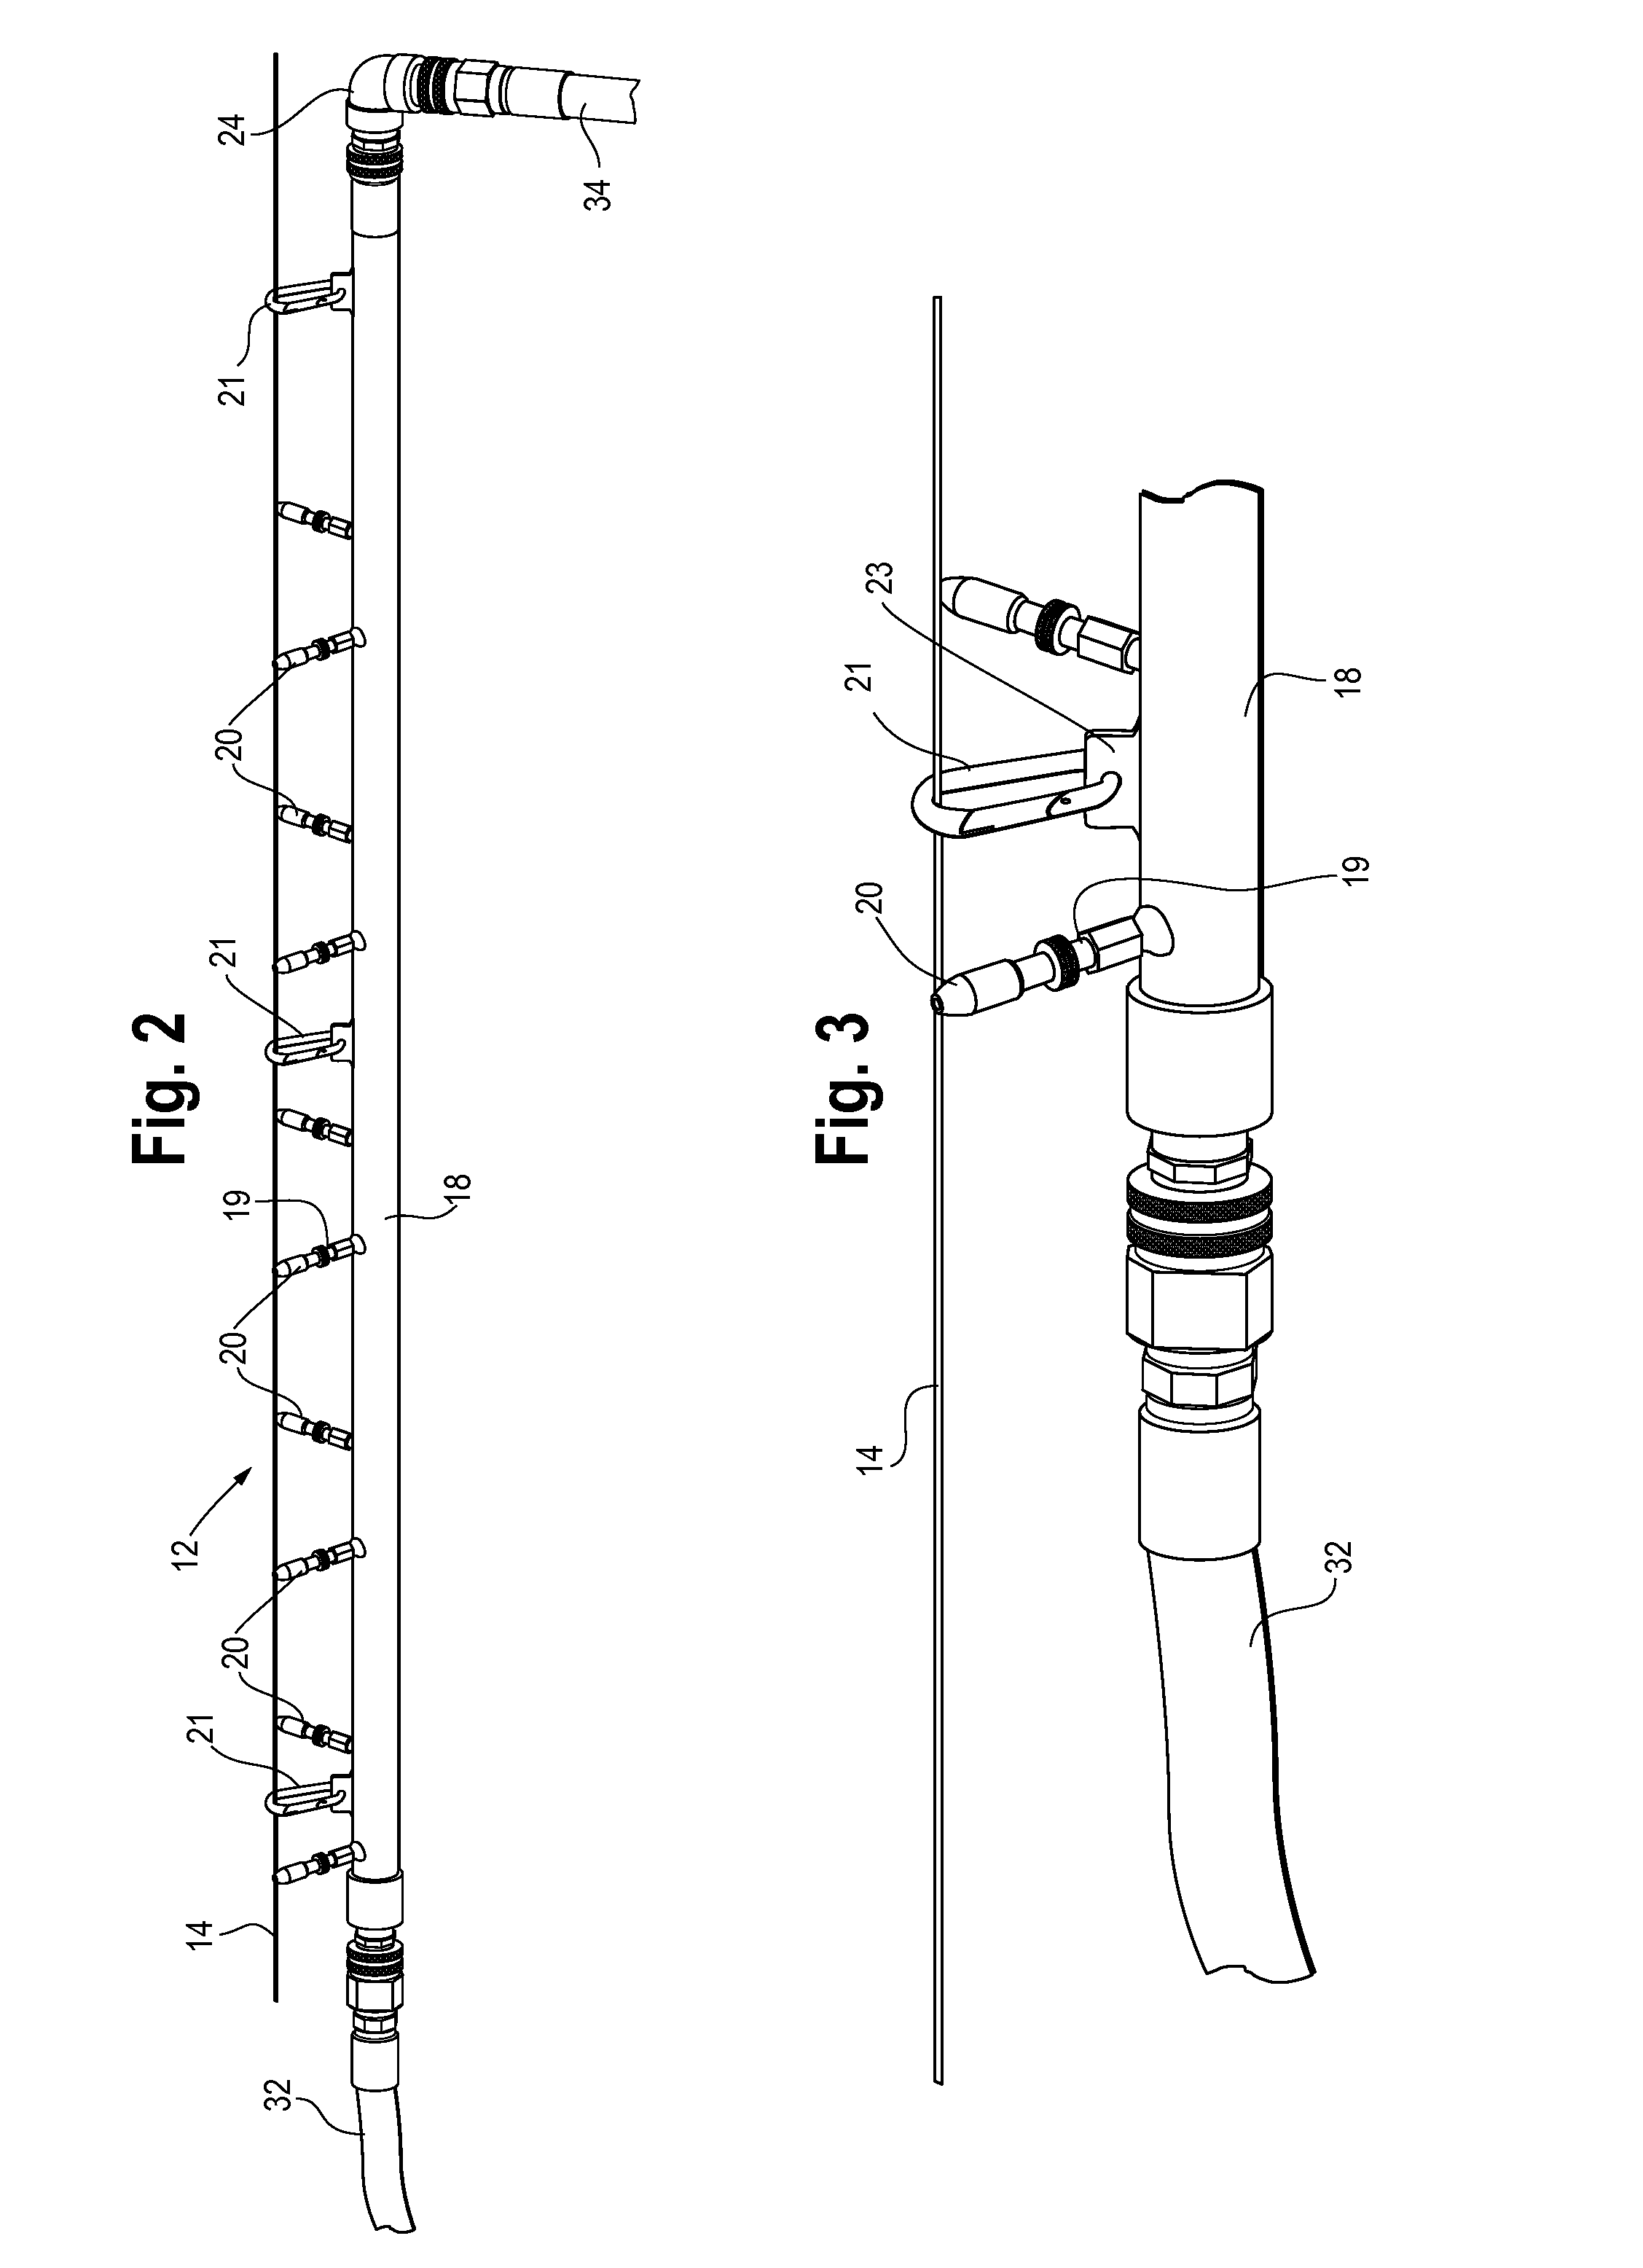 Water evaporation system using nozzles attached to a suspended cable